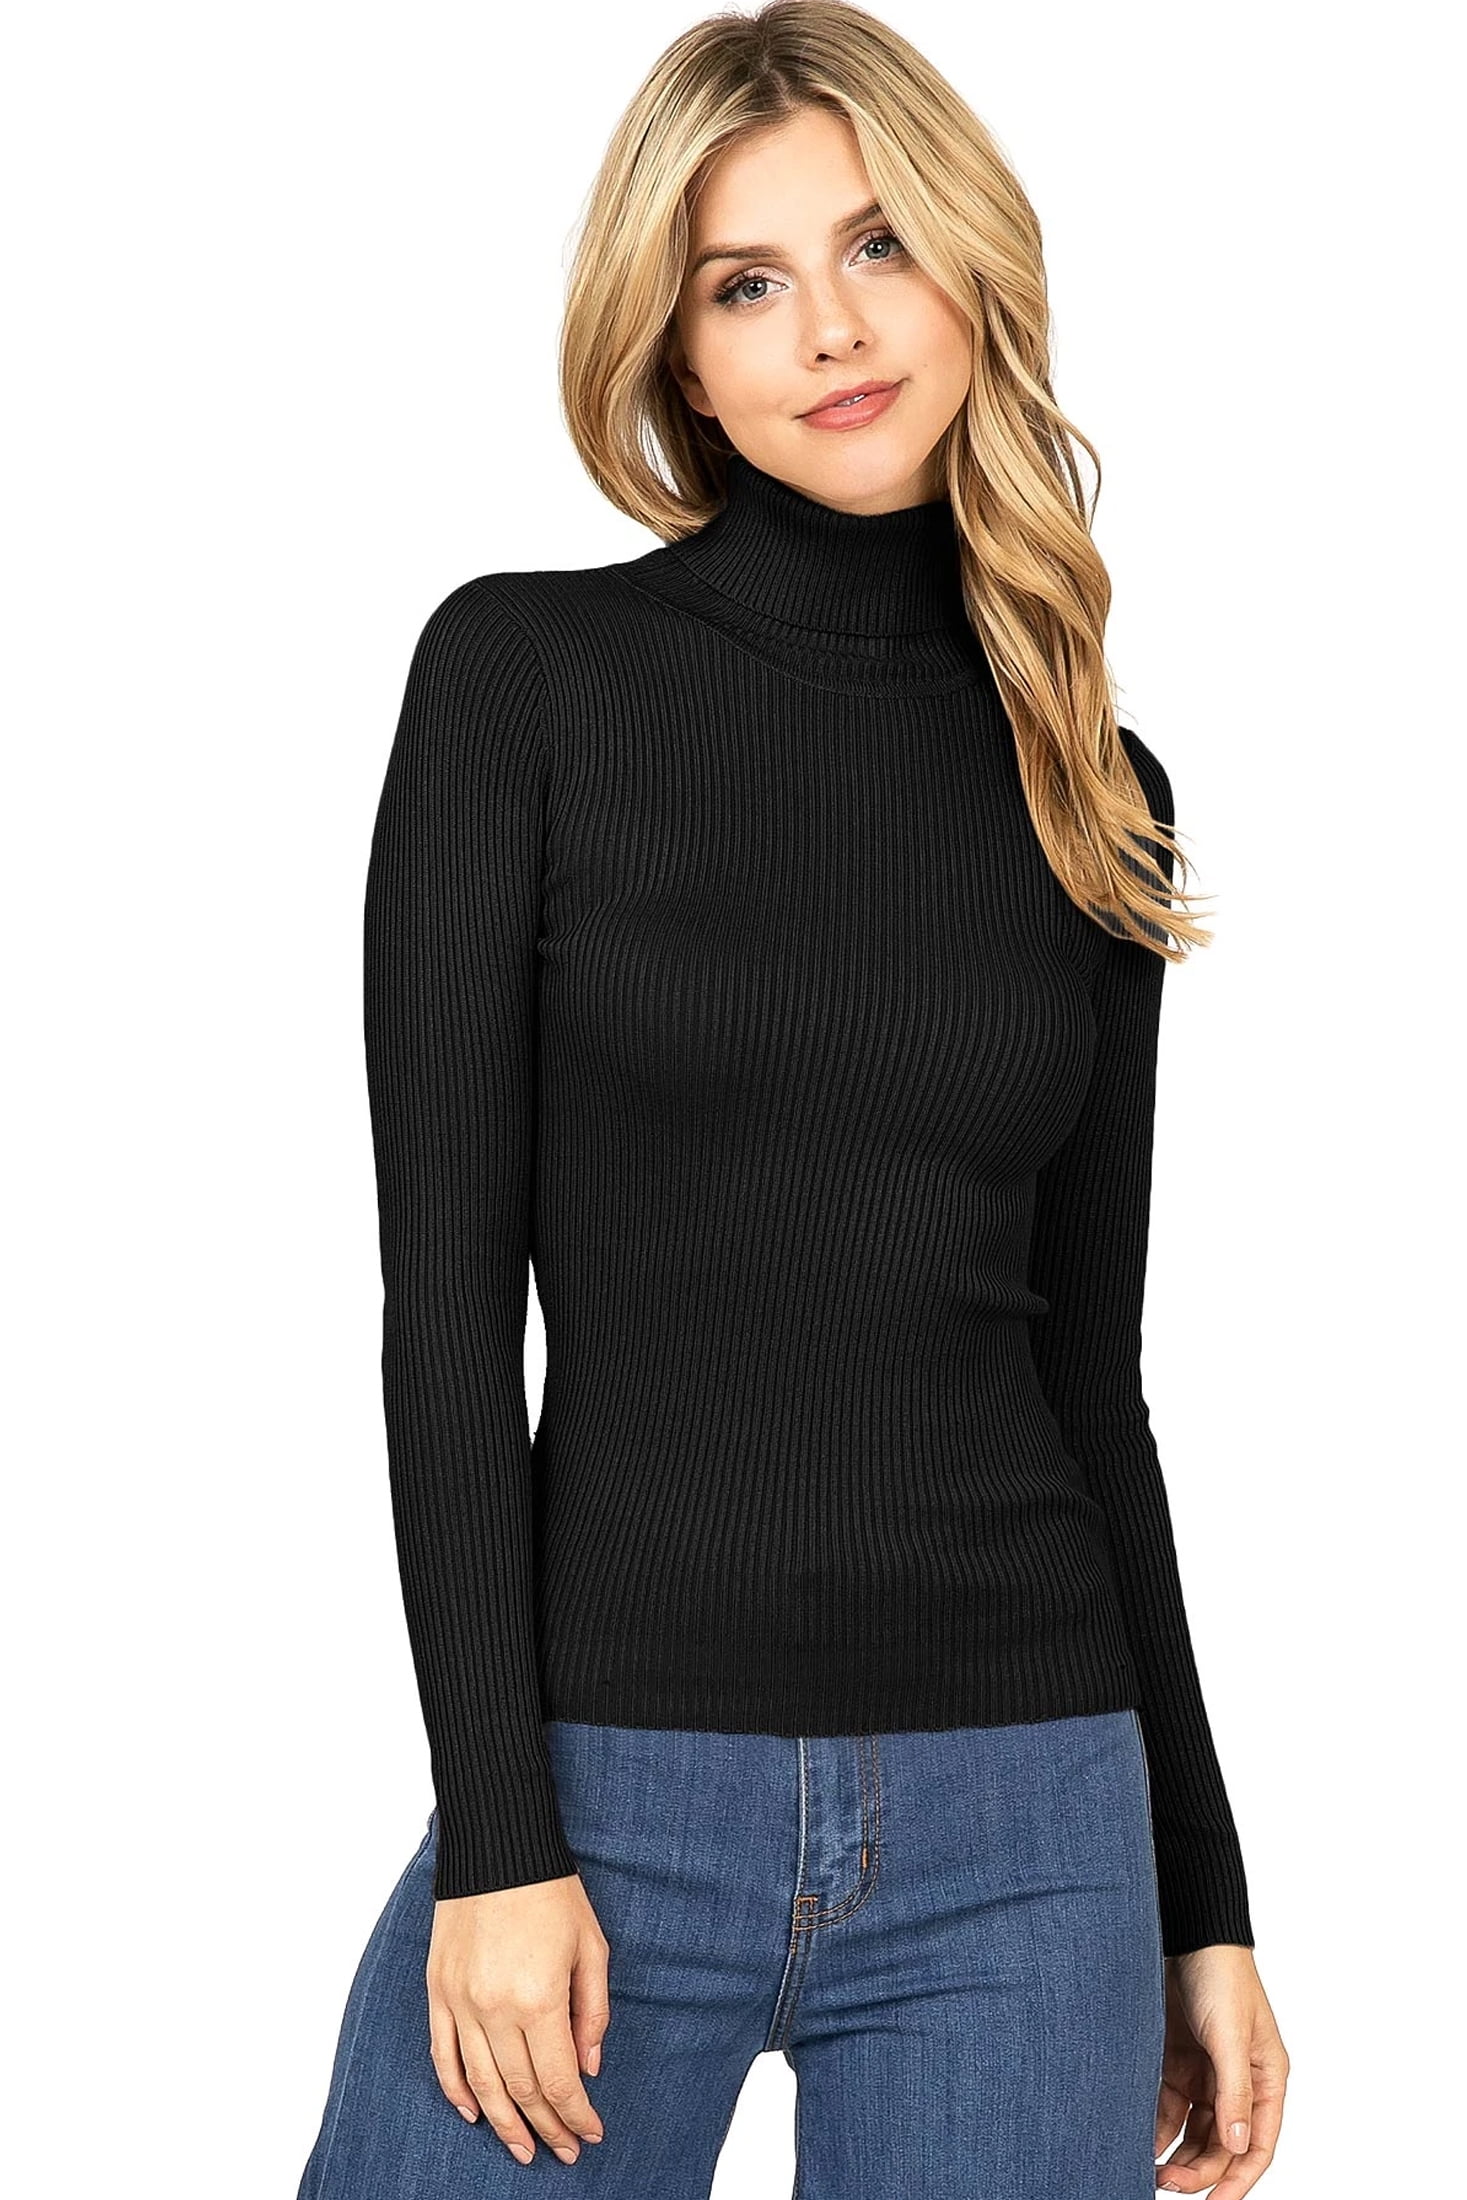 Ambiance Apparel Womens Stretchy Ribbed Long Sleeve Turtle Neck Top L